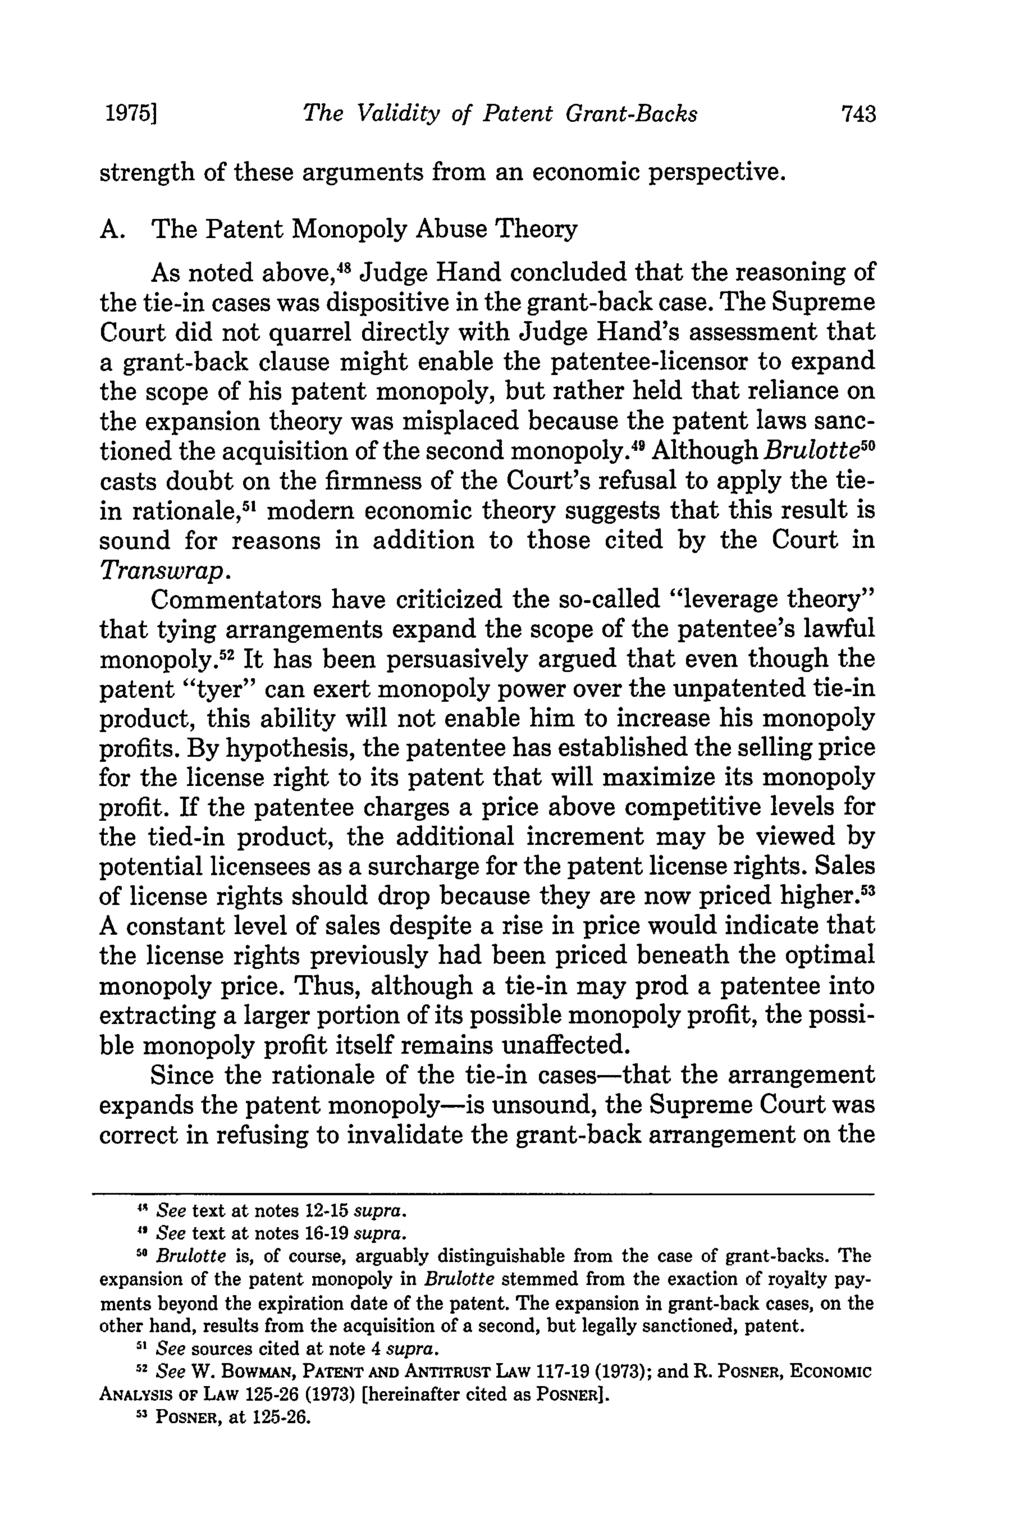 19751 The Validity of Patent Grant-Backs strength of these arguments from an economic perspective. A.